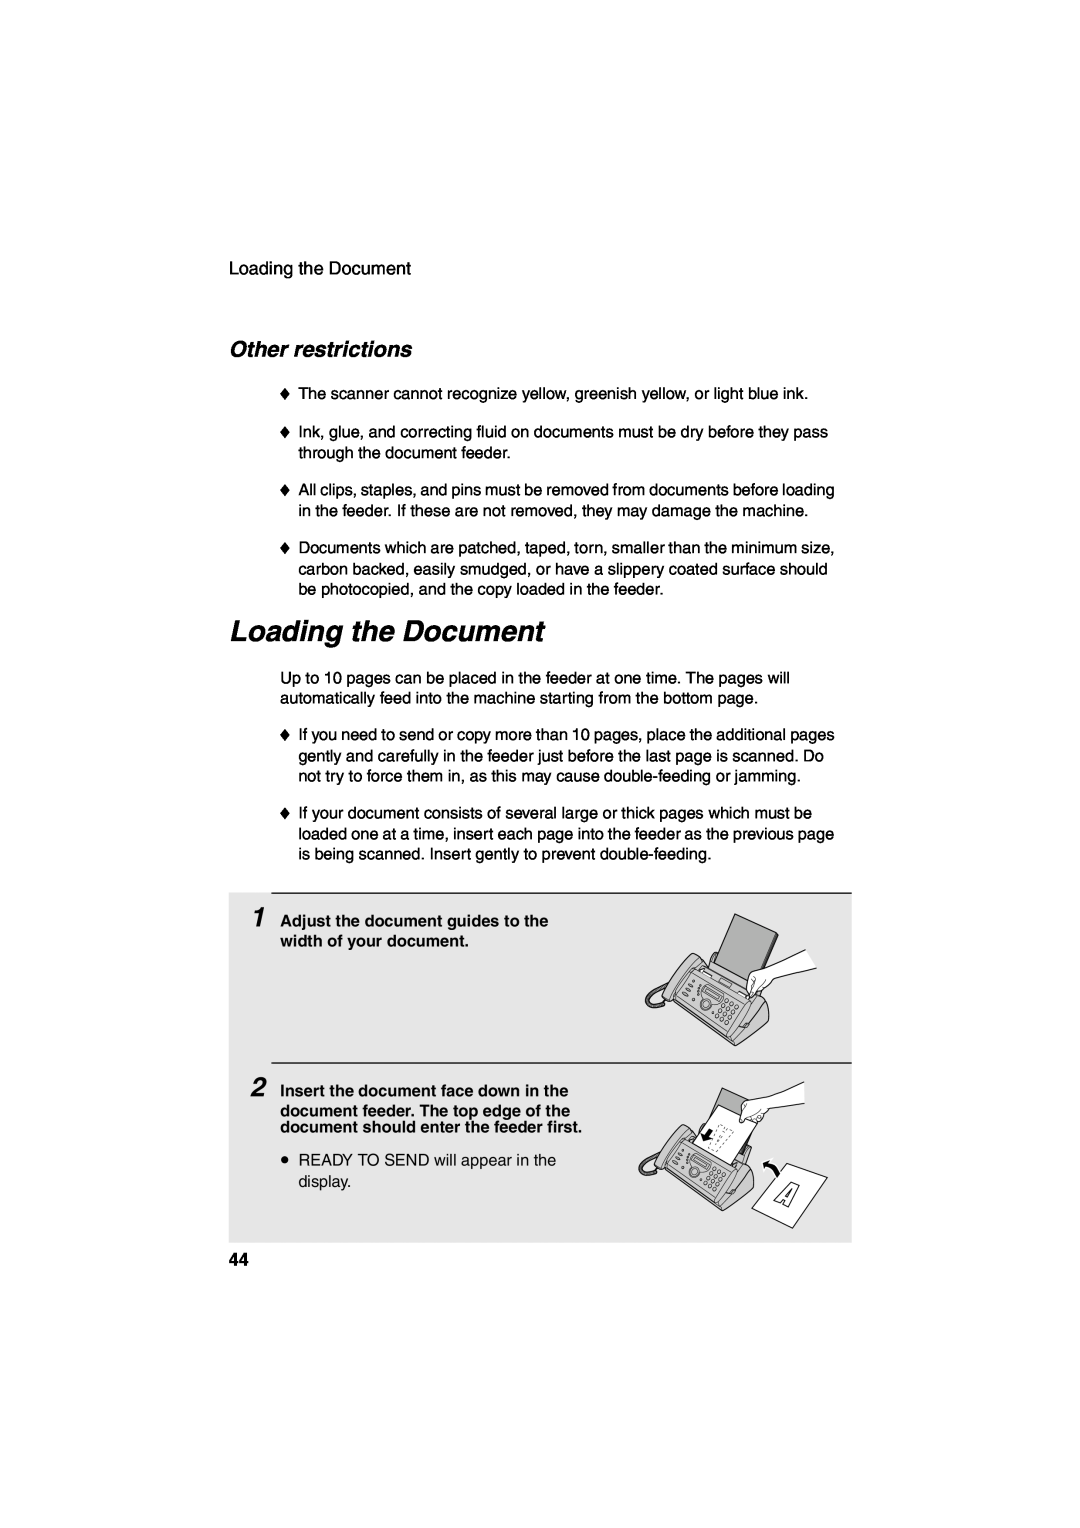 Sharp UX-A260 manual Loading the Document, Other restrictions 